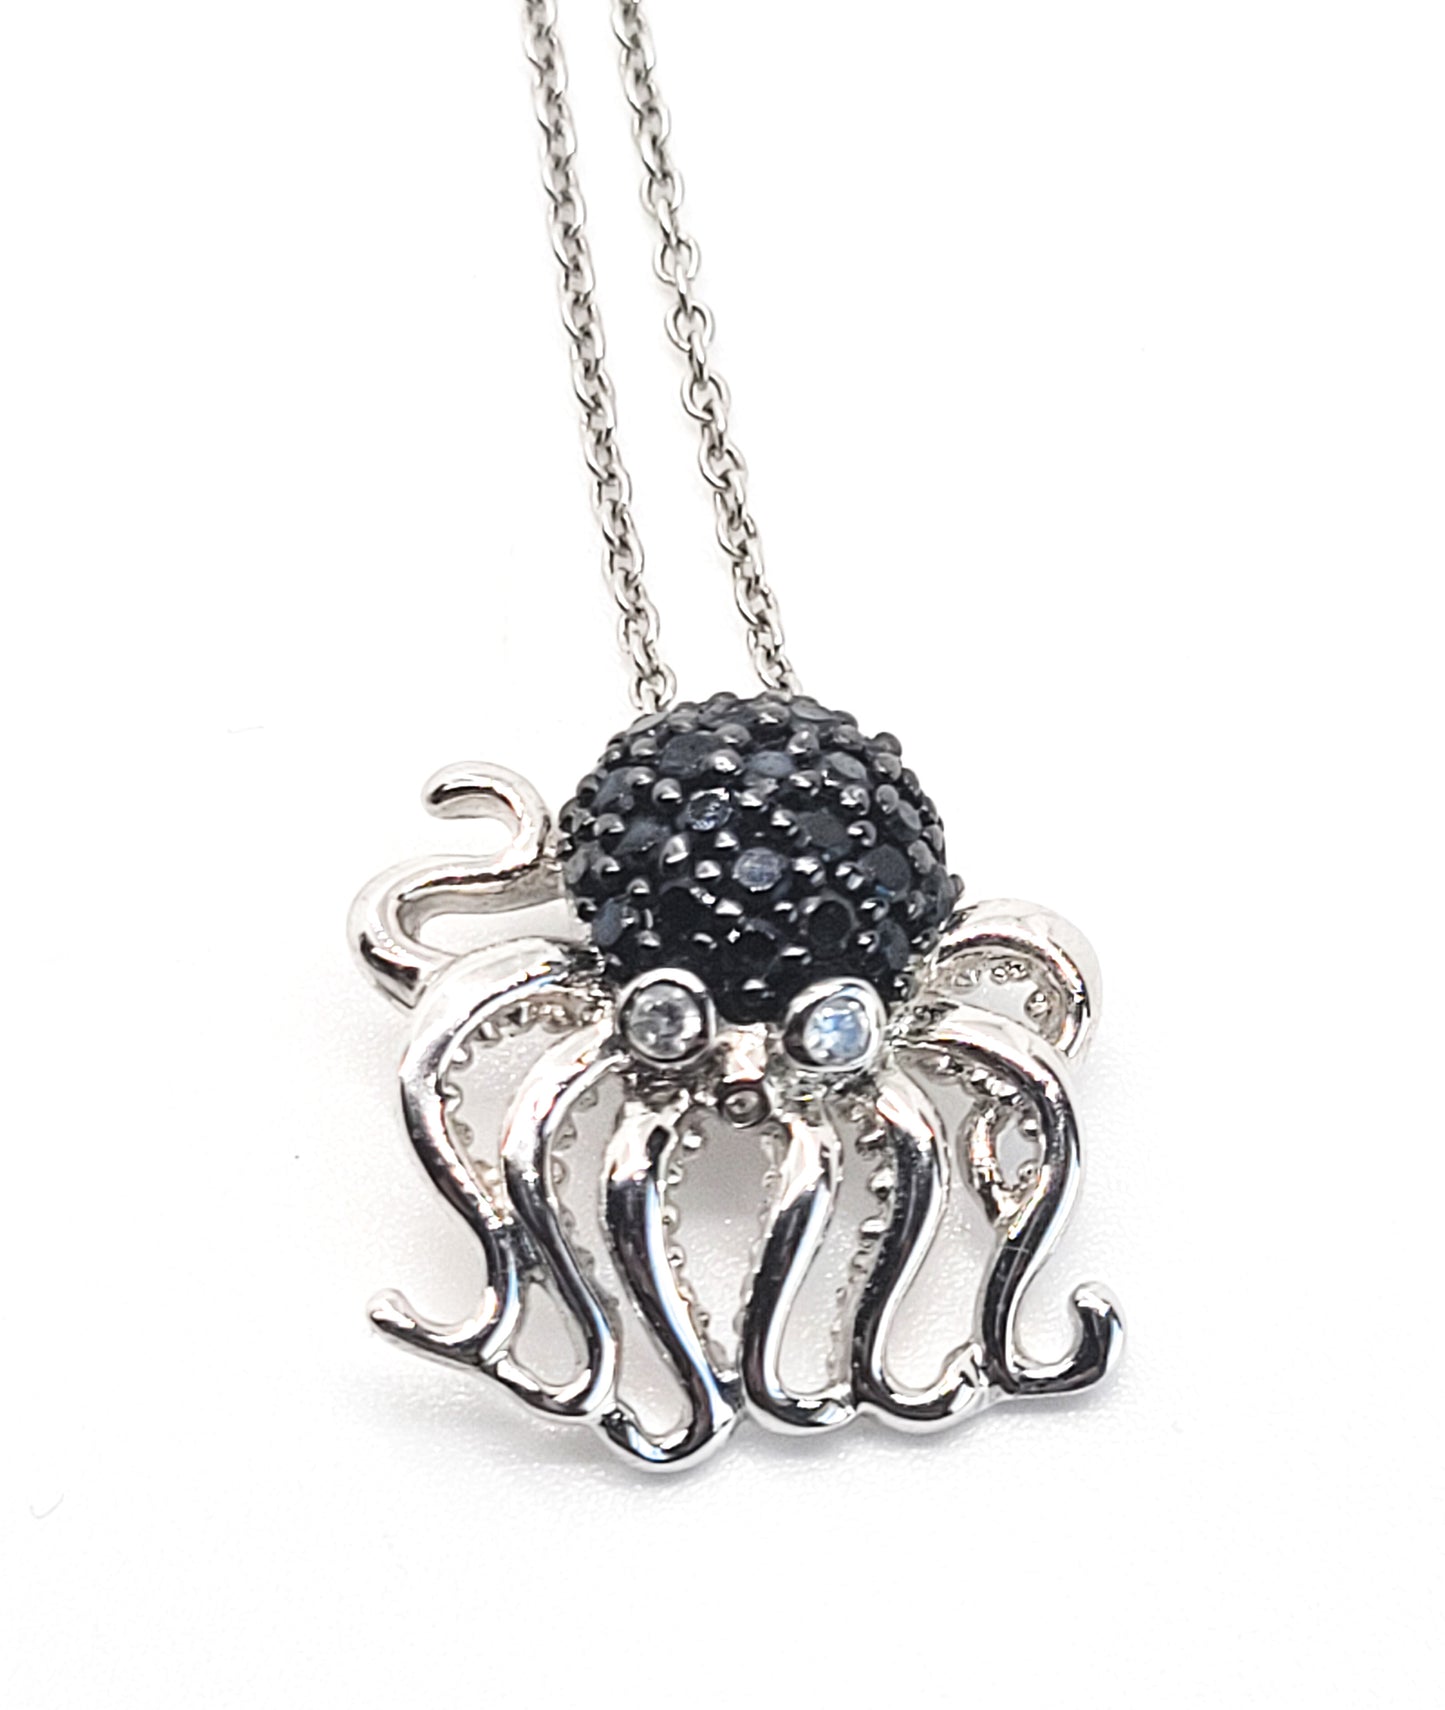 Octopus black and white Cubic Zirconia FD signed sterling silver pendant necklace